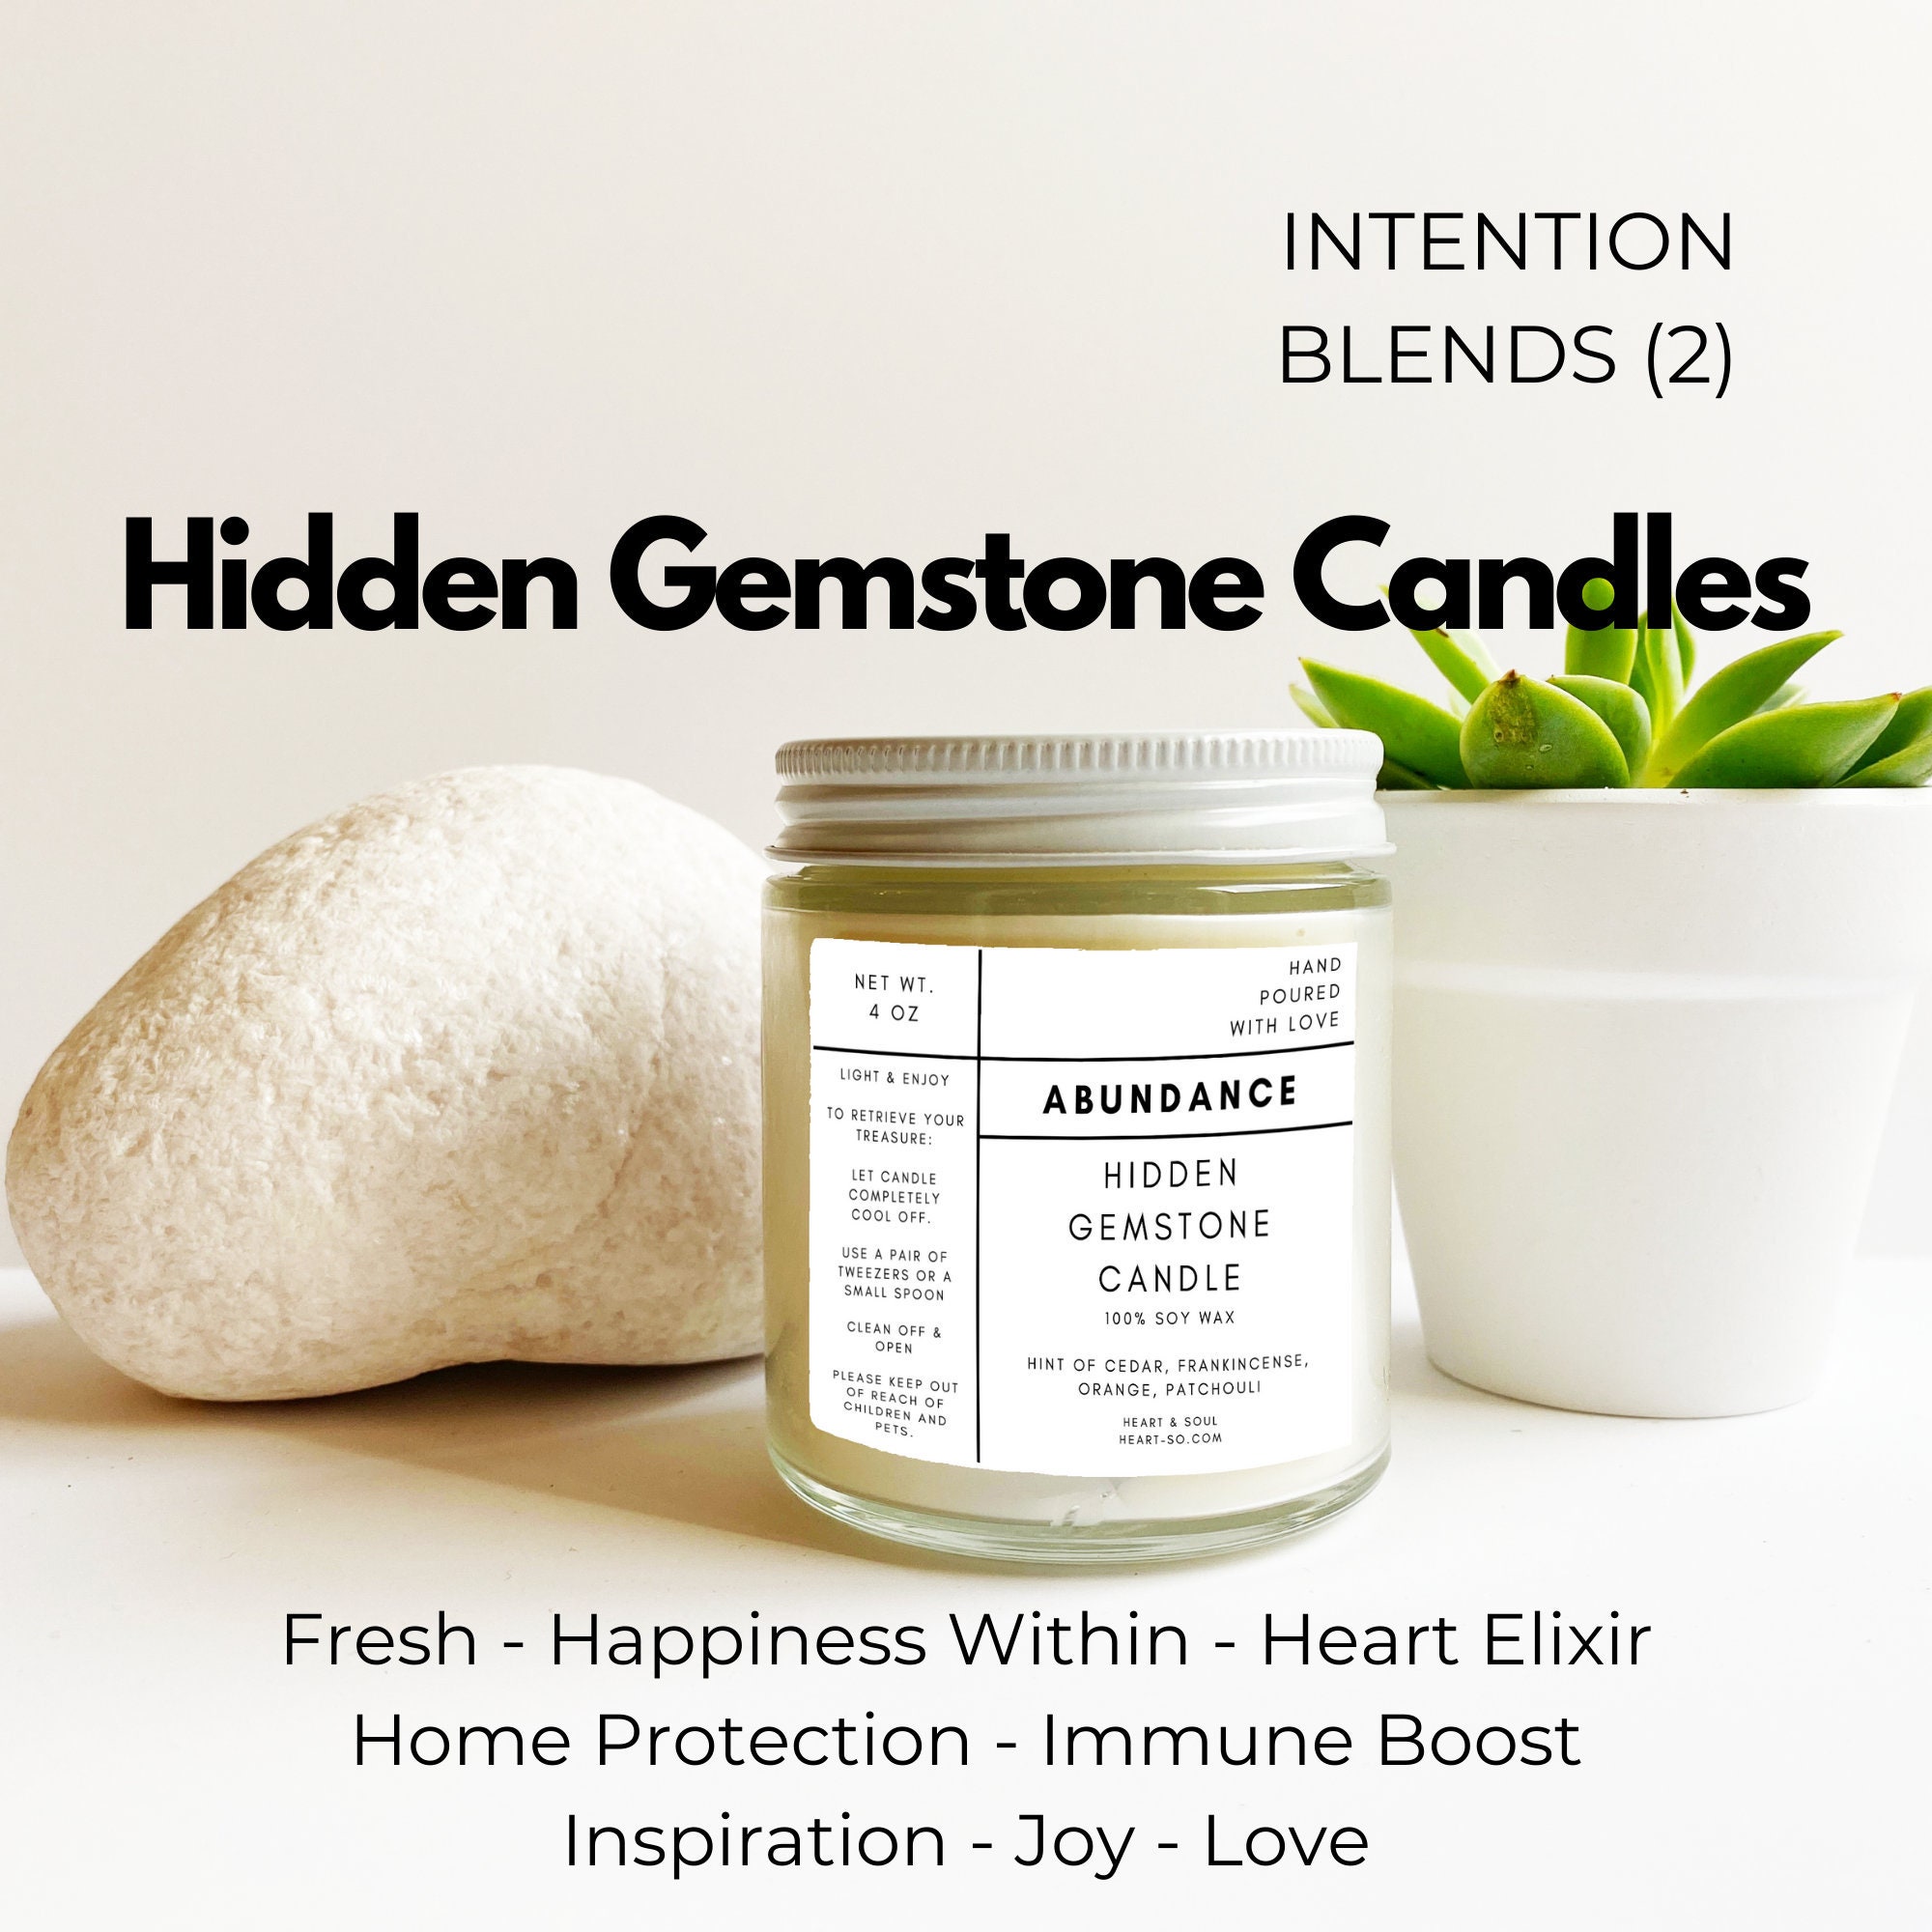 Intention Blends | 2 - Fresh To Love 4 Oz Hidden Gemstone Soy Wax Candle, Lightly Scented, Natural Essential Oils, Treasure